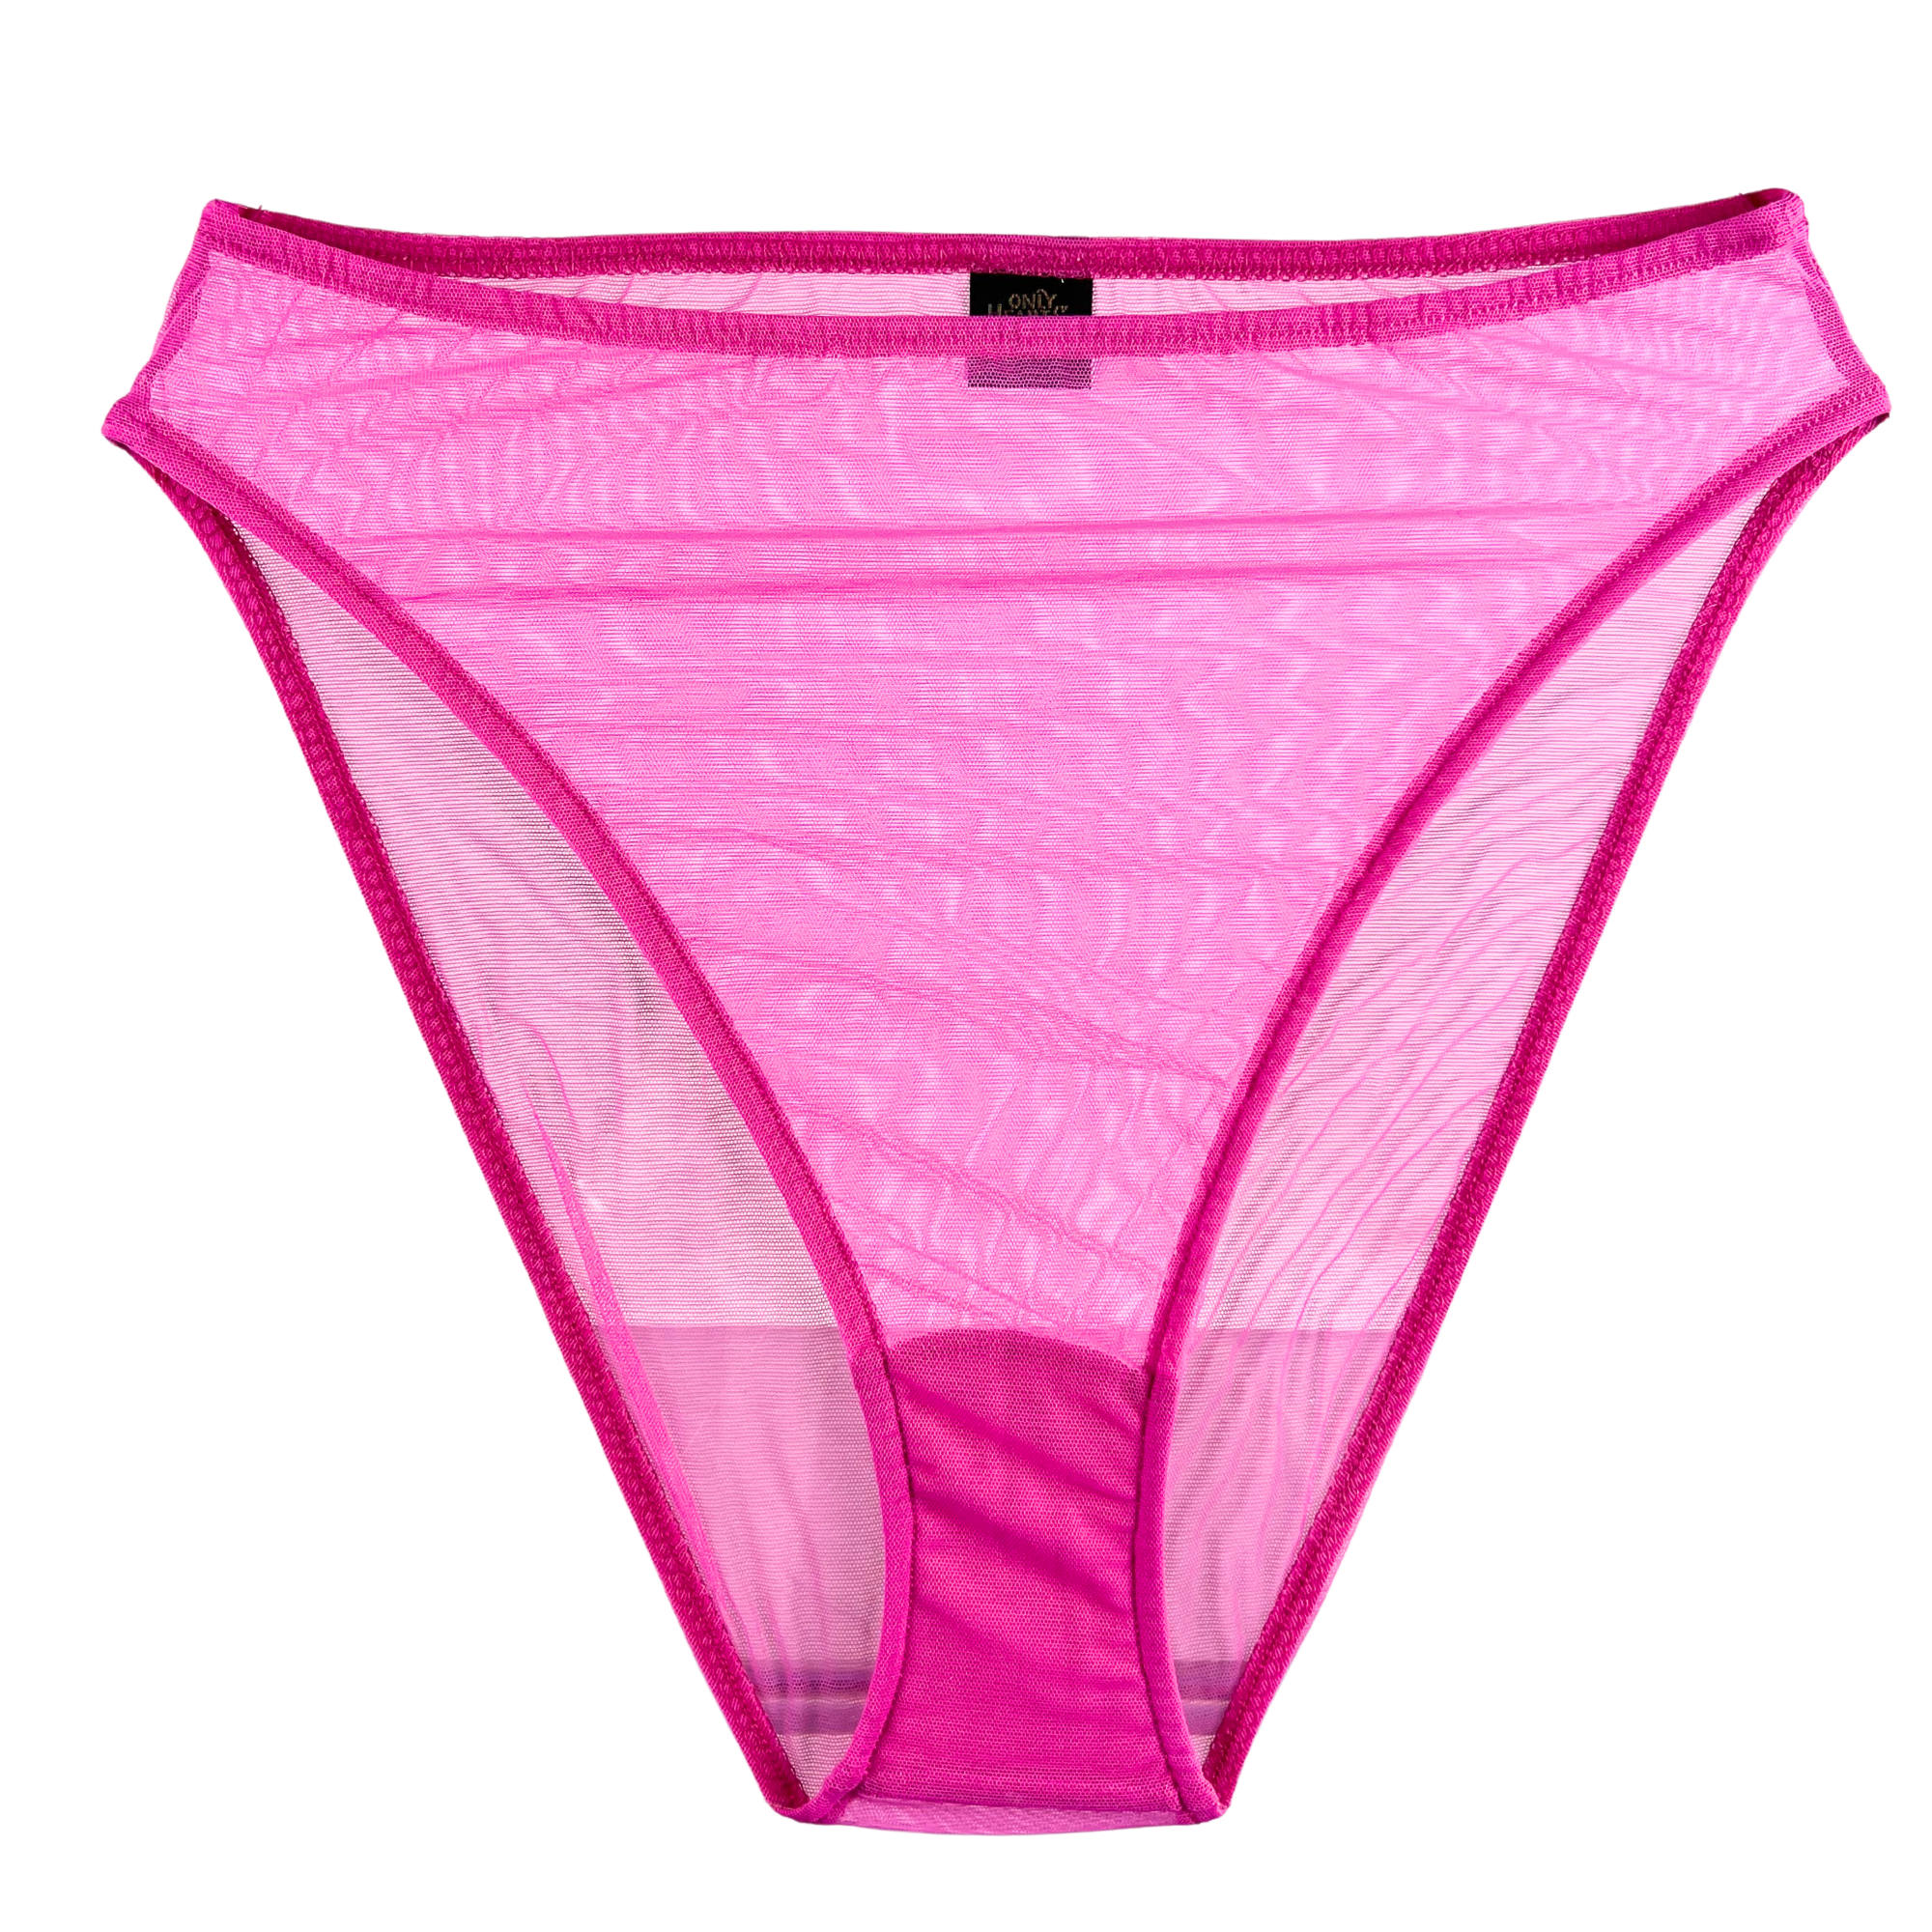 Only Hearts Whisper High Cut Brief - French Rose